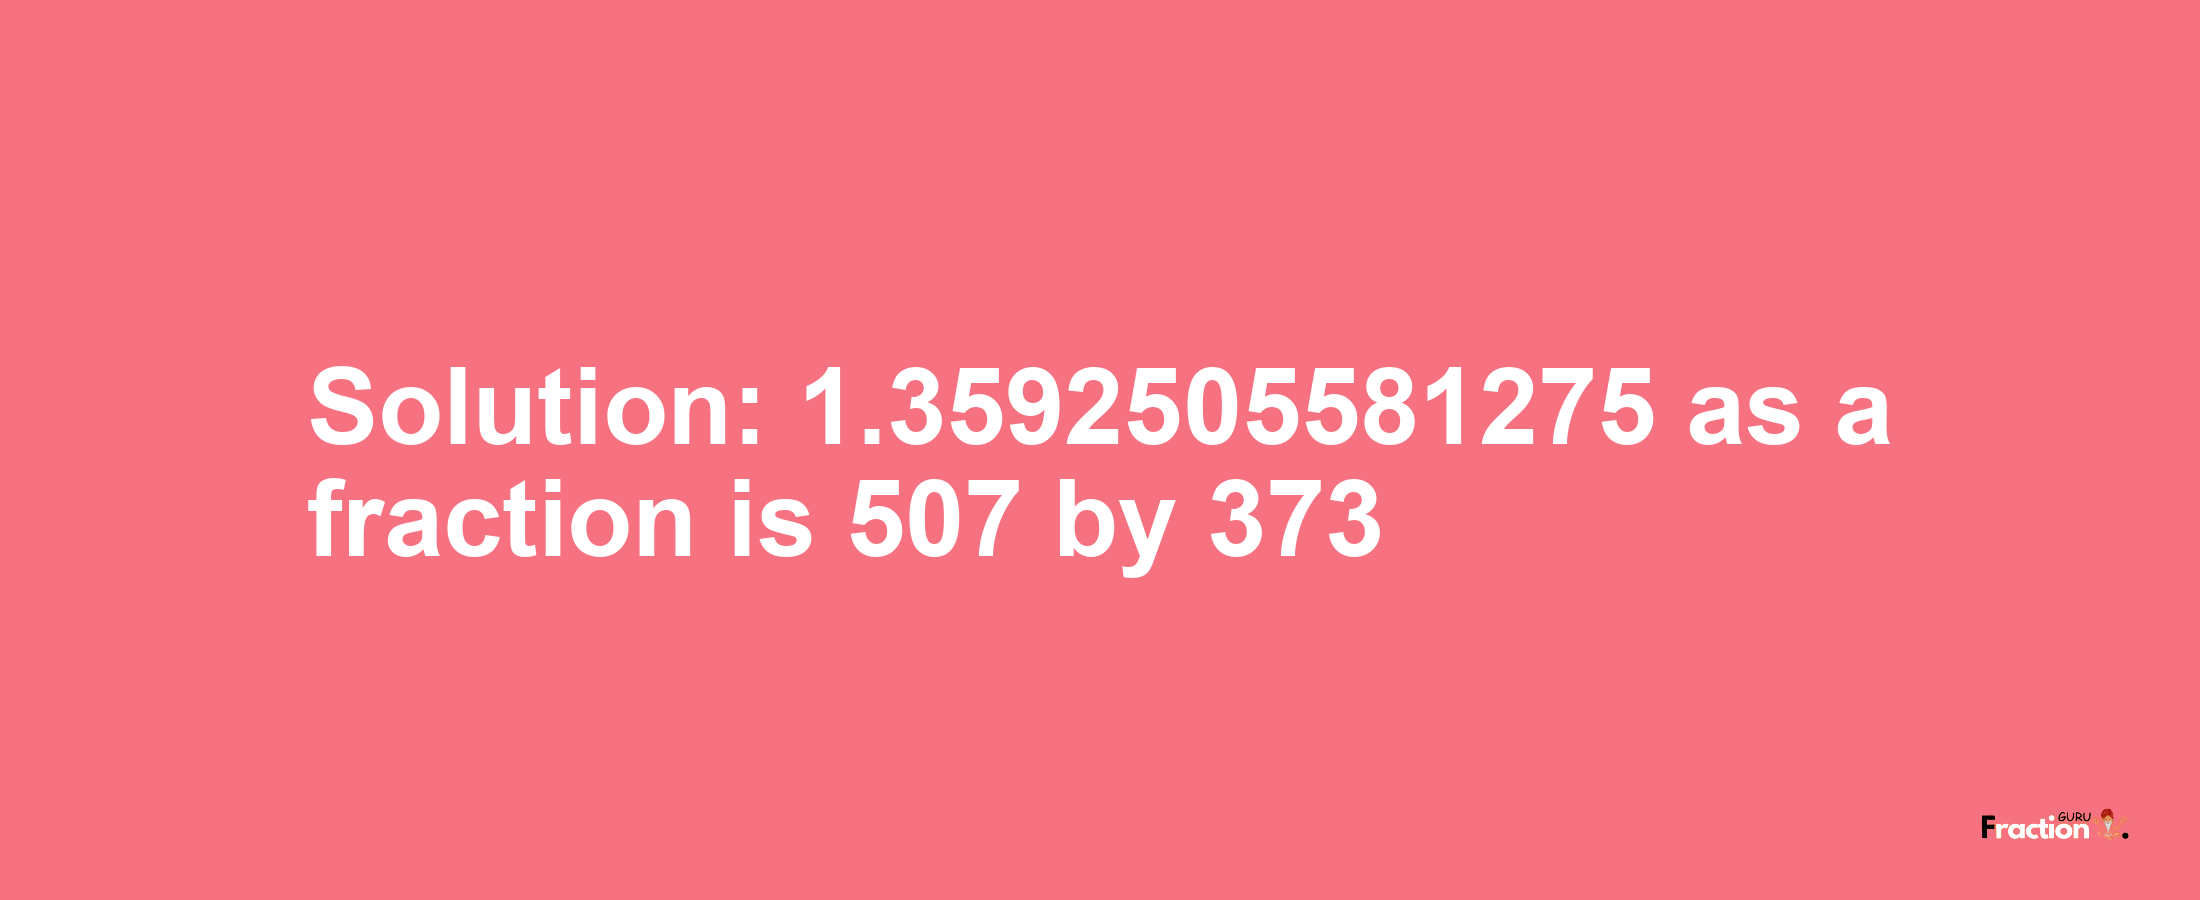 Solution:1.3592505581275 as a fraction is 507/373